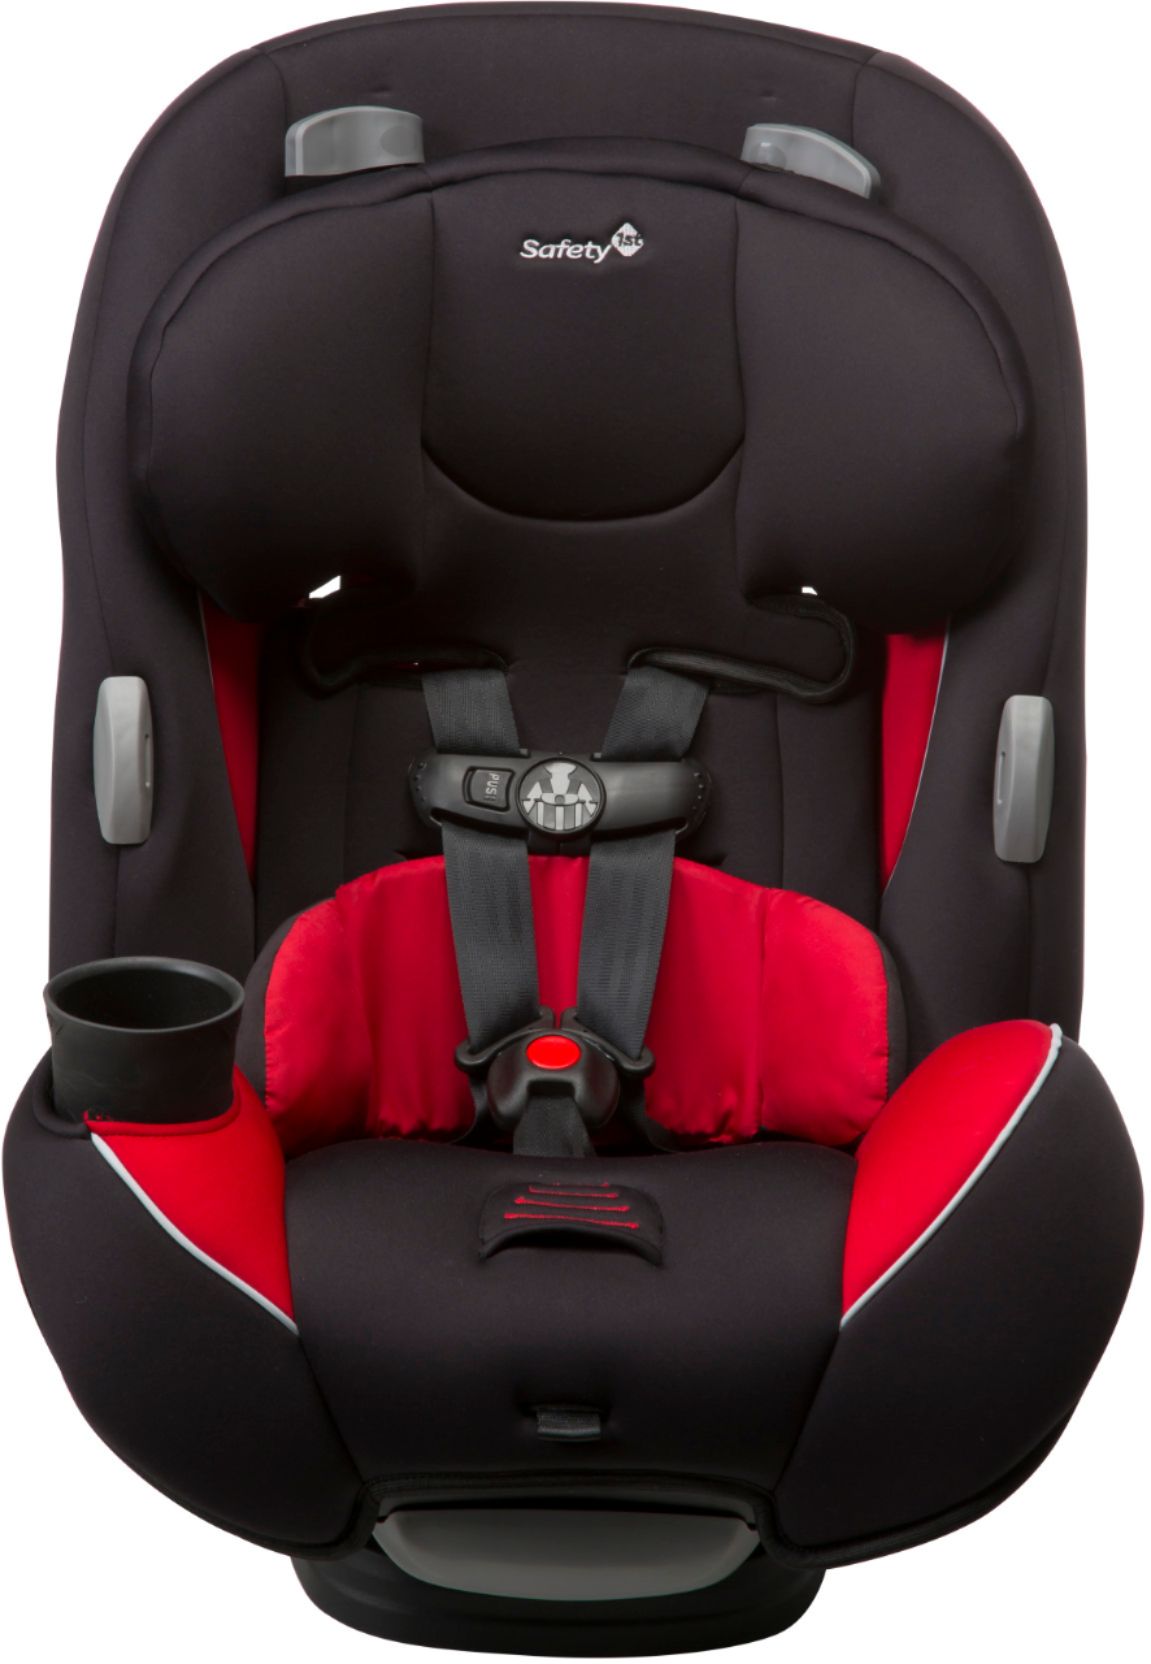 Safety 1st - Continuum 3-in-1 Car Seat - Chili Pepper II